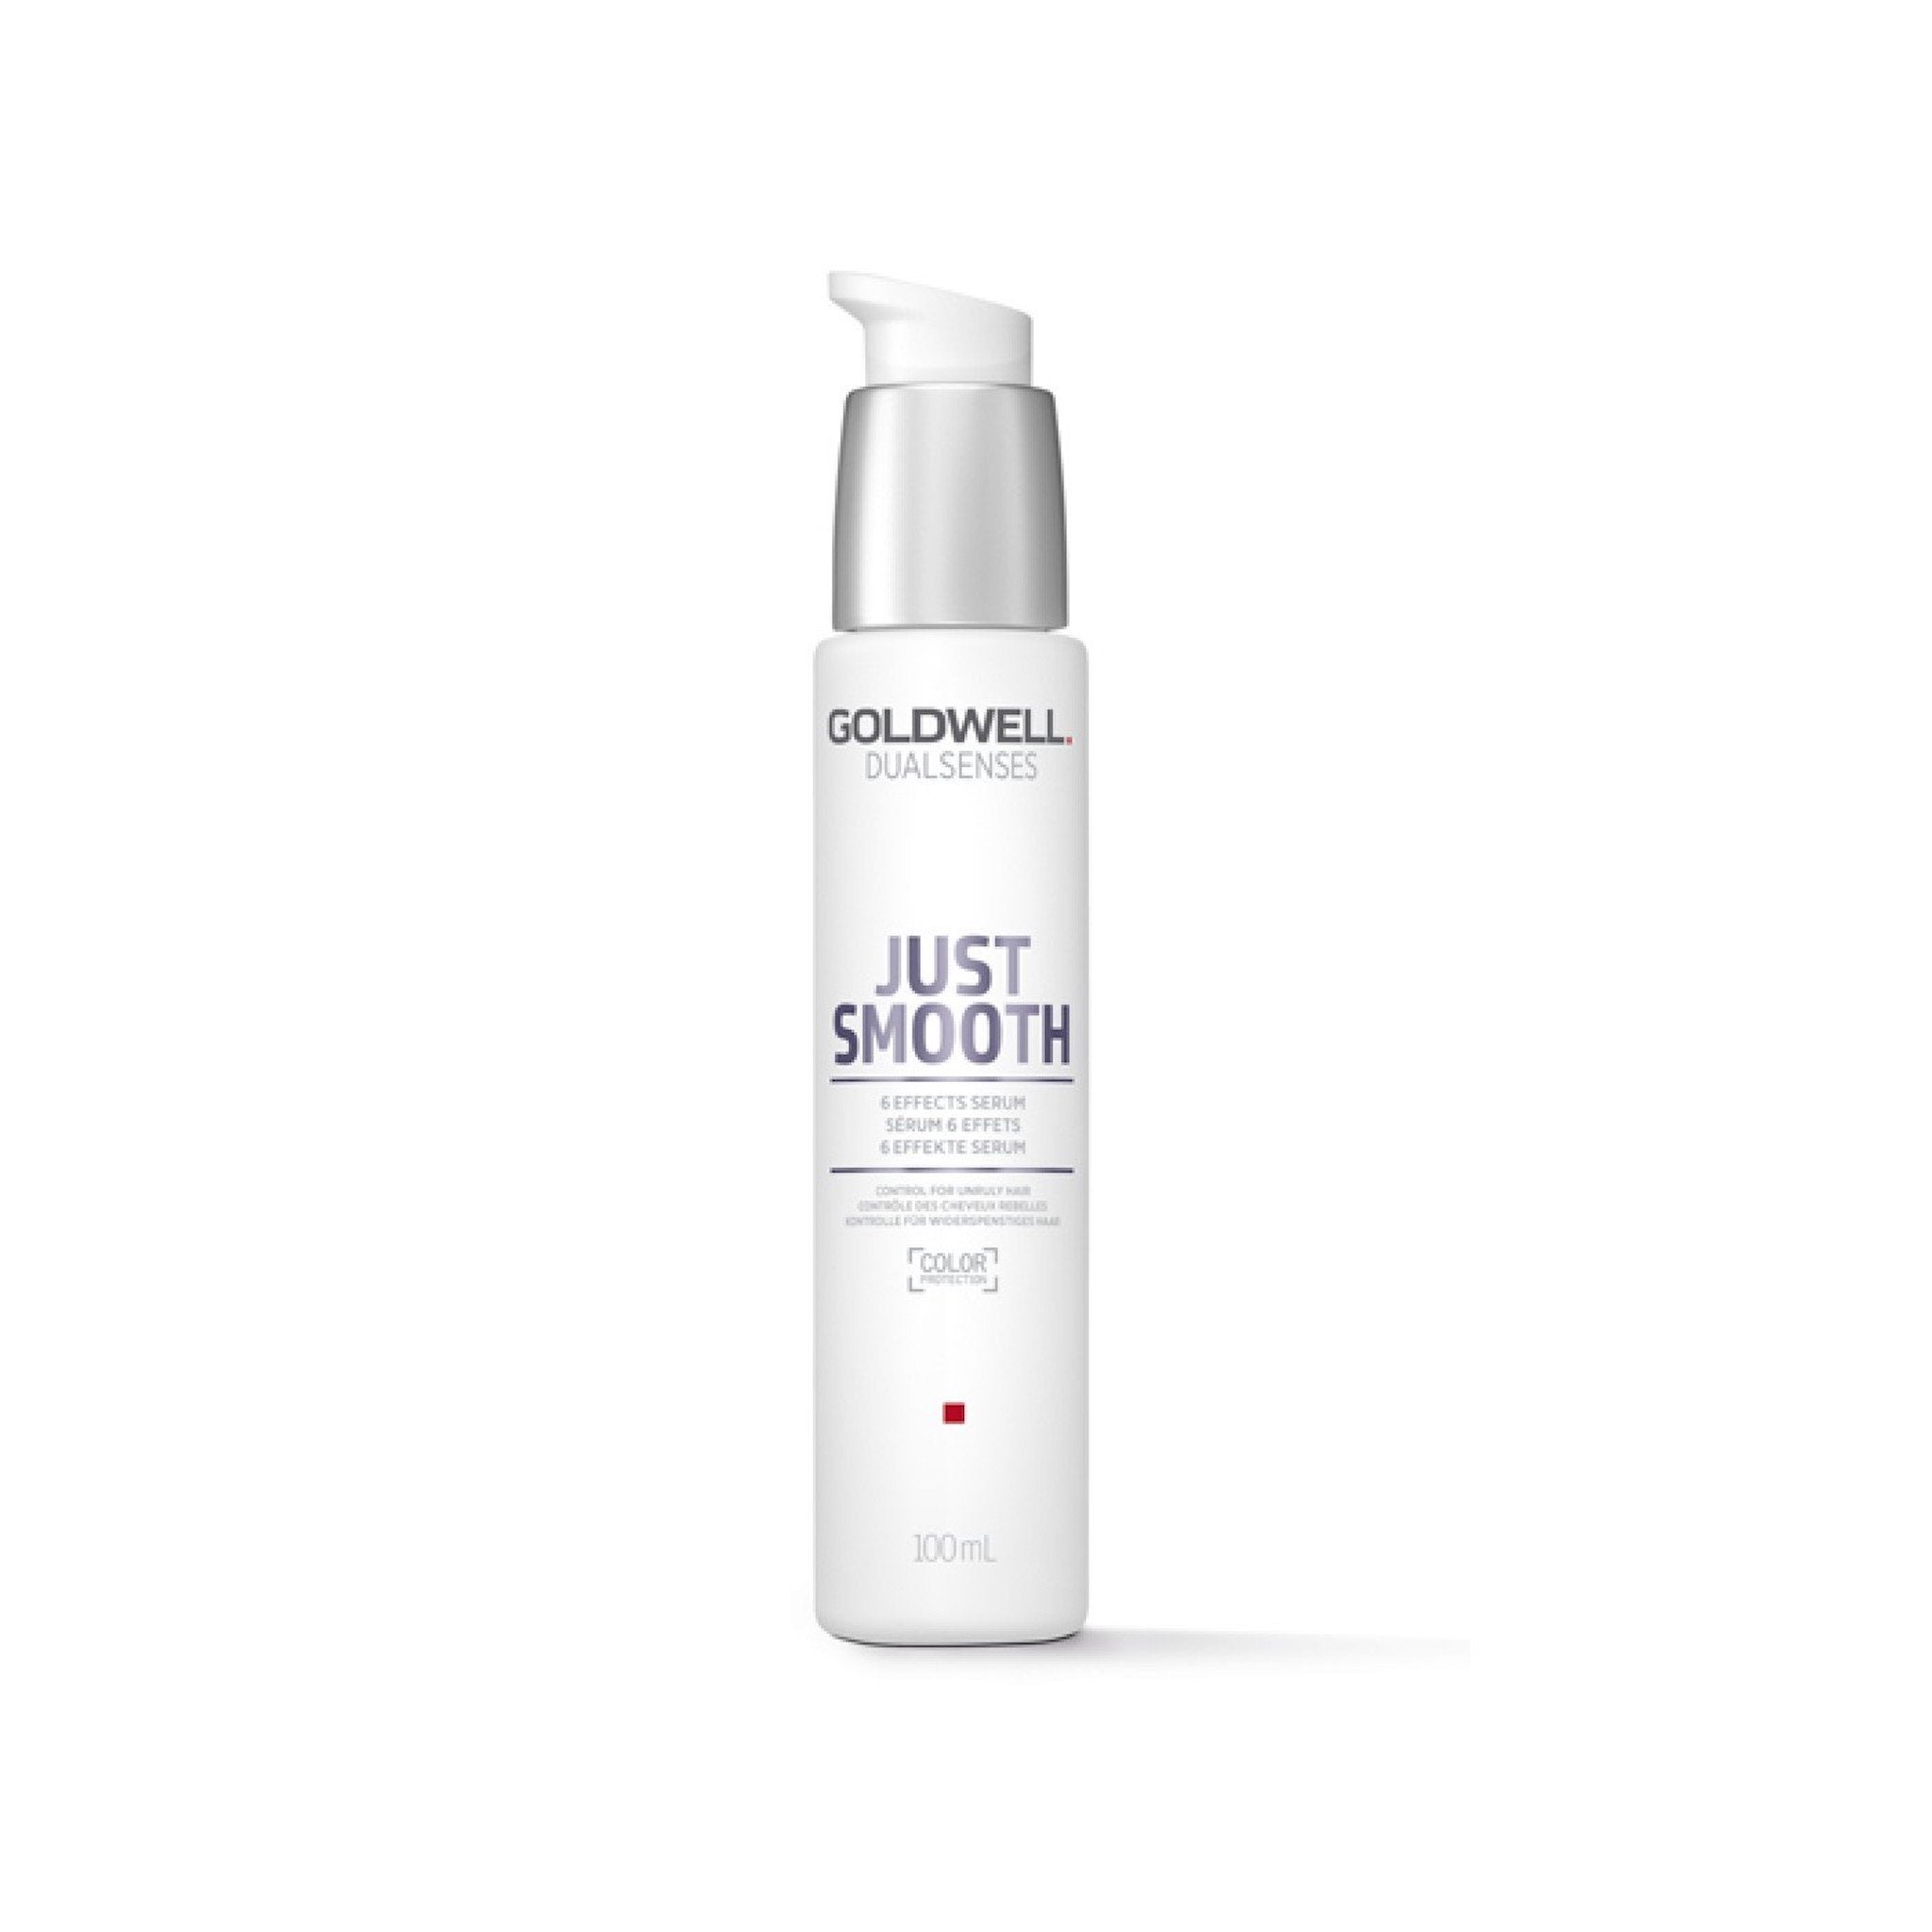 Goldwell. Just Smooth Sérum 6 Effets - 100 ml - Concept C. Shop